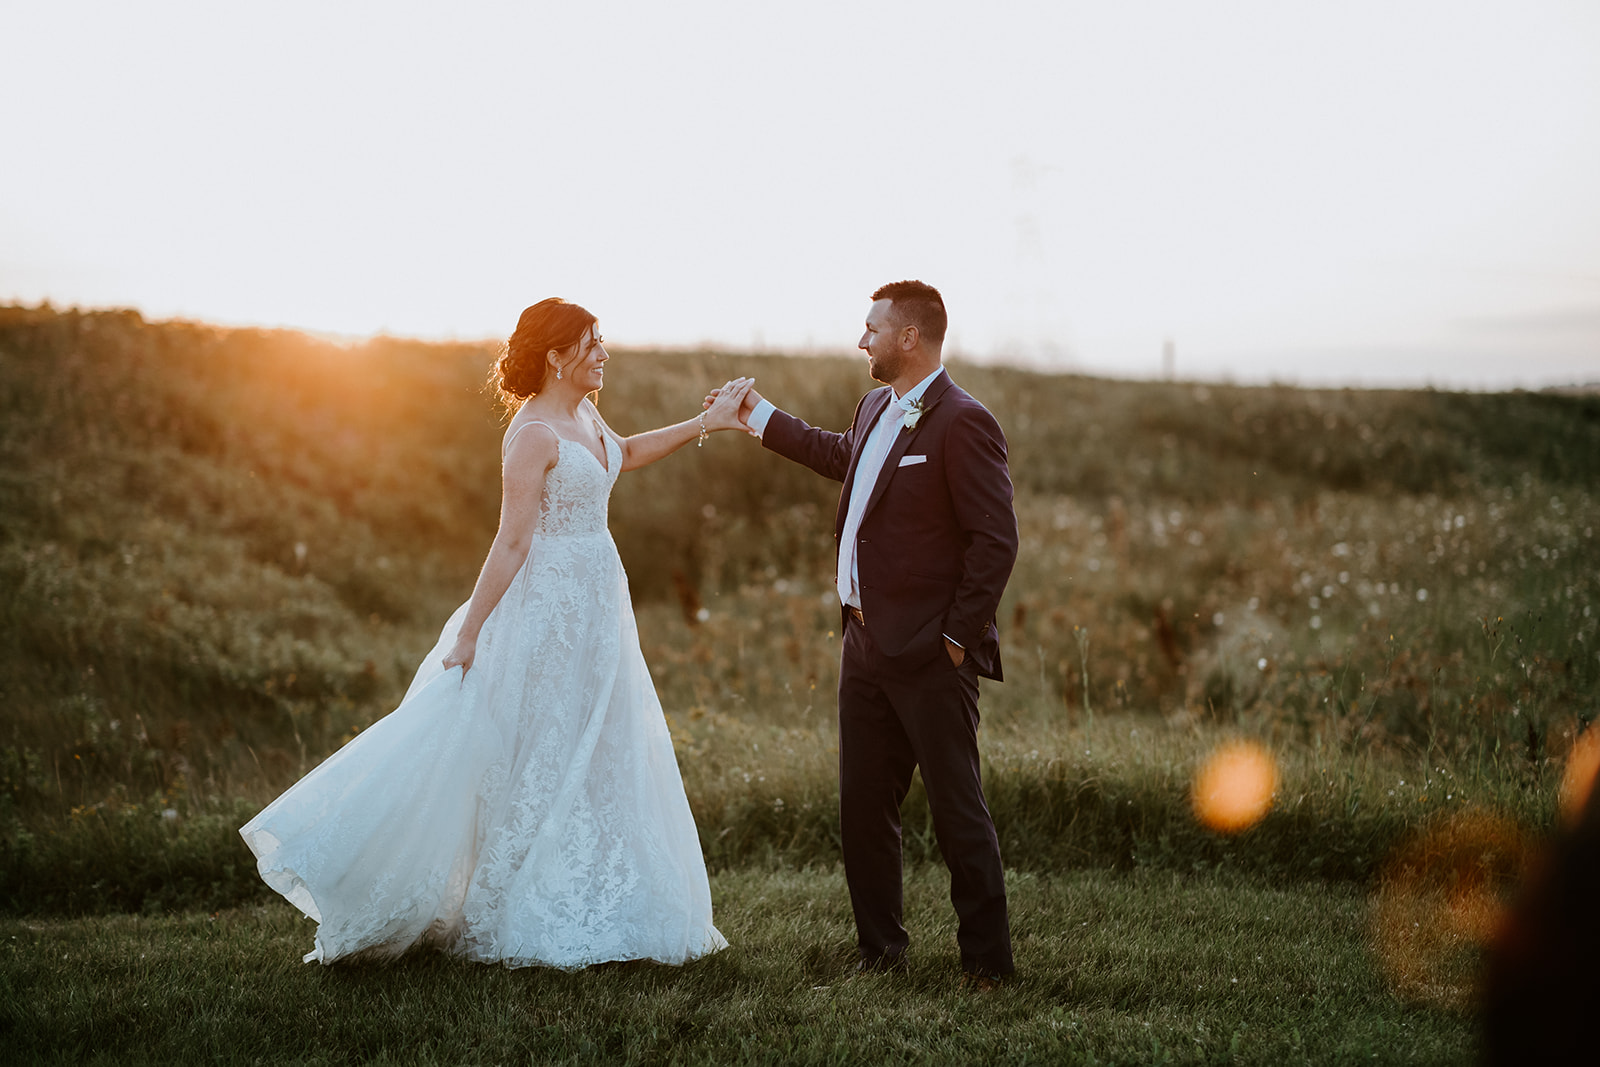 Bride and groom holding hands in a sunny field at dusk.